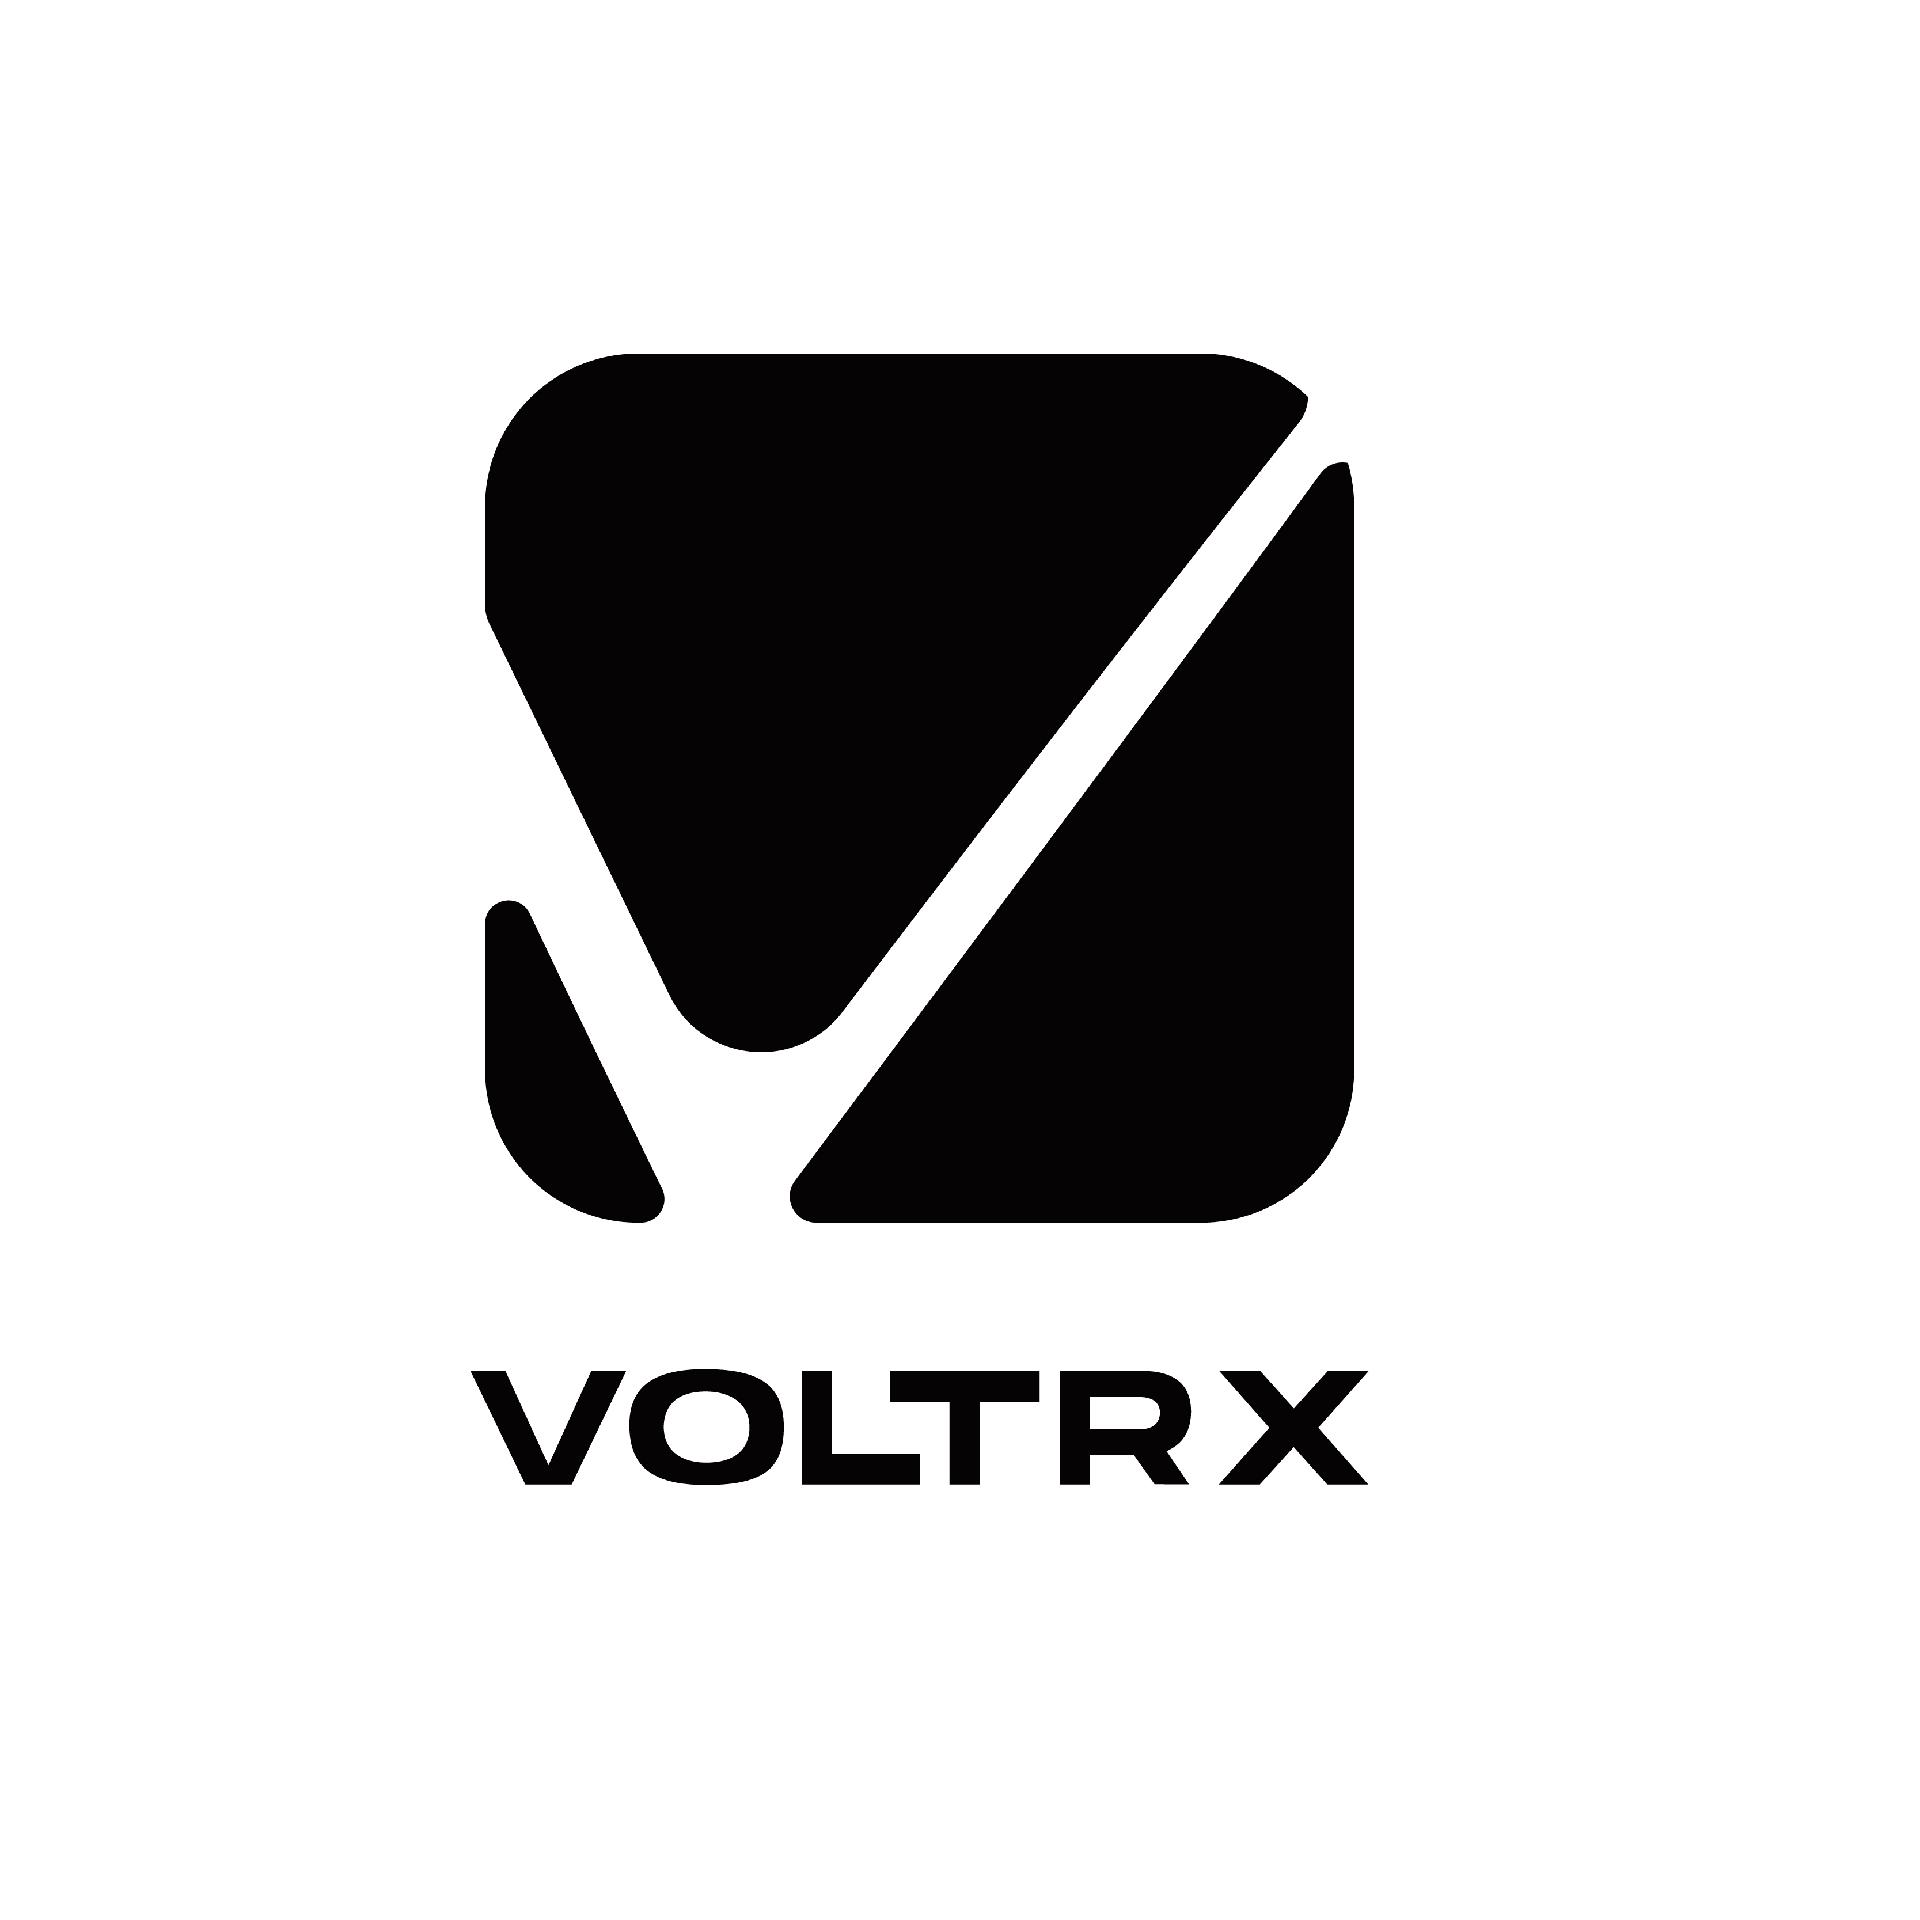 voltrxofficial's images